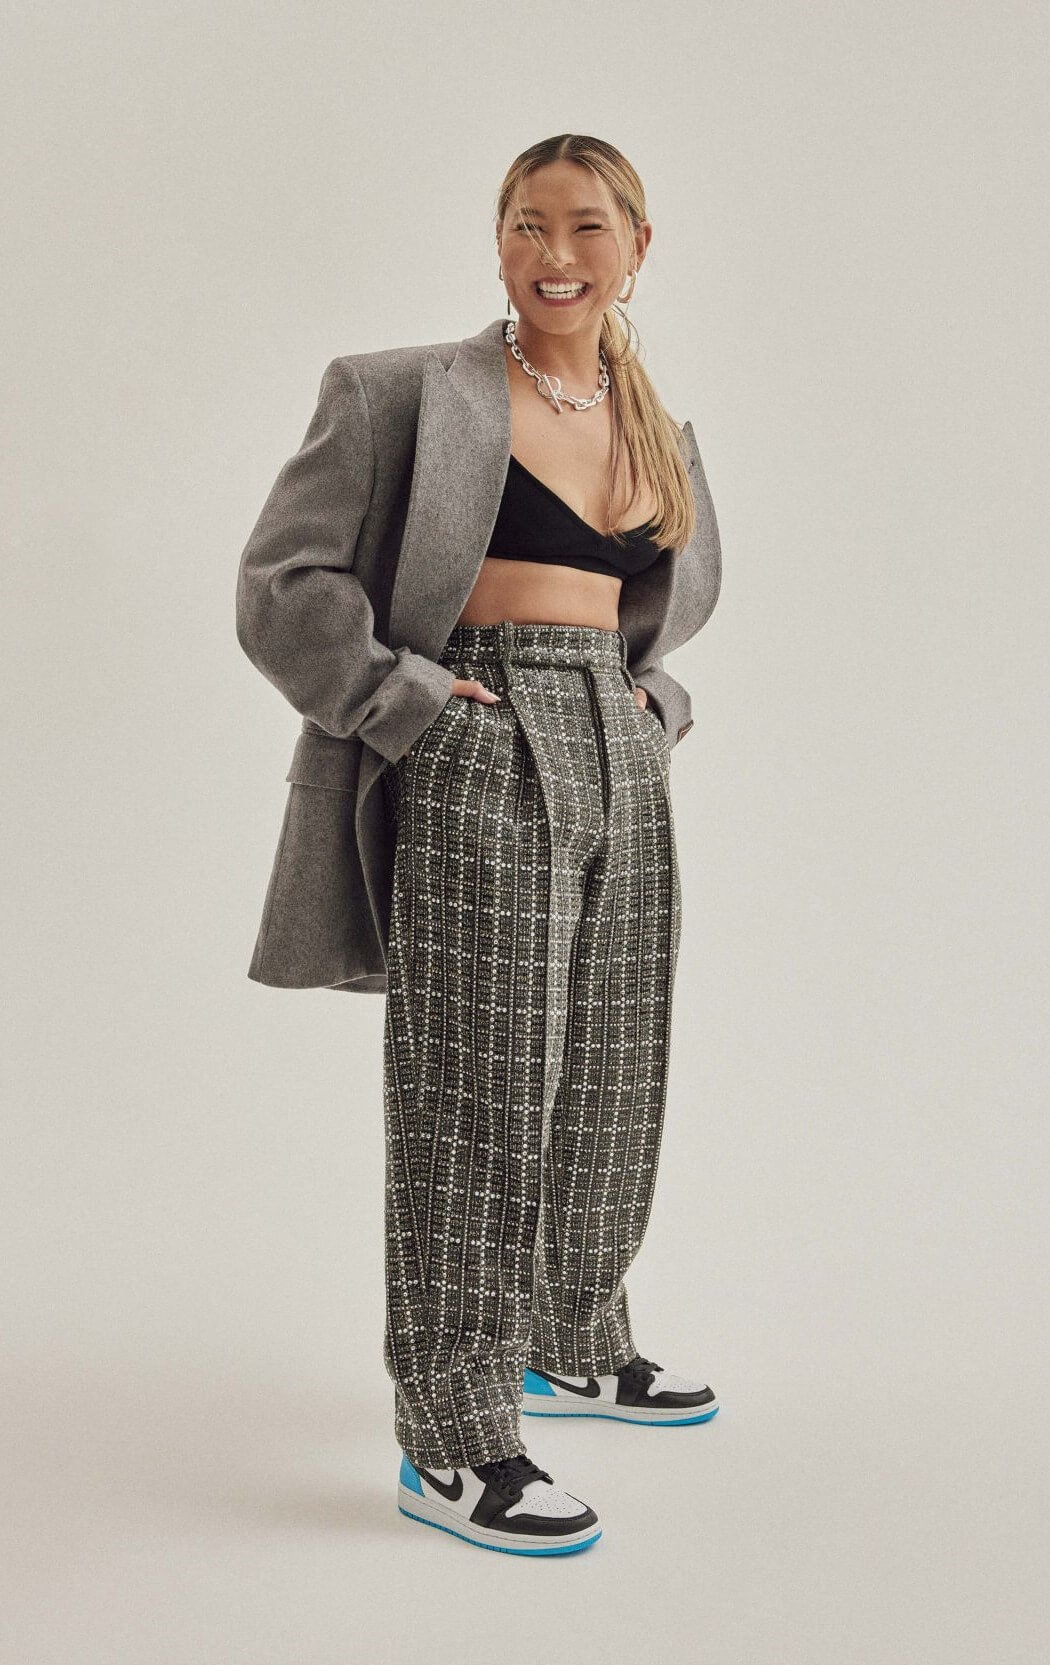 Chloe Kim Perfect Looks In Grey Long BlazerUnder Bralette With Checked Pants  Outfits